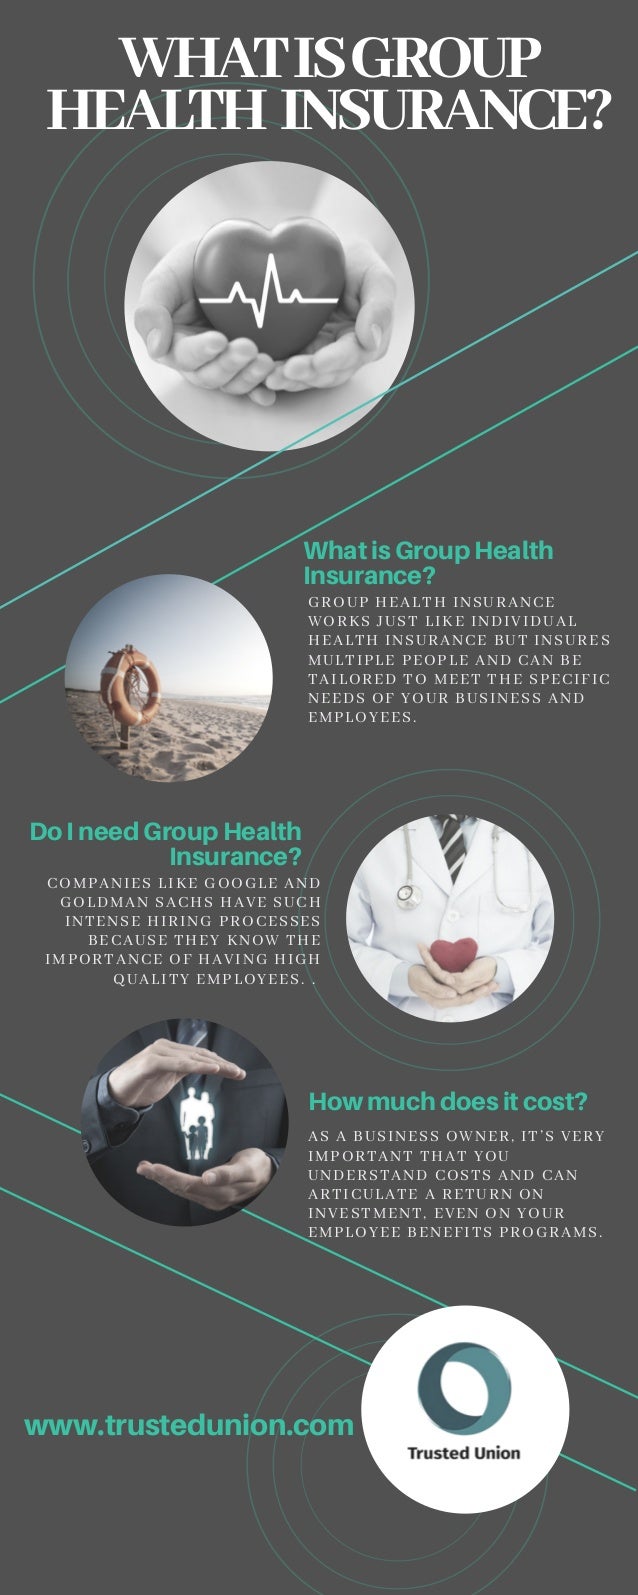 What Is Group Health Insurance